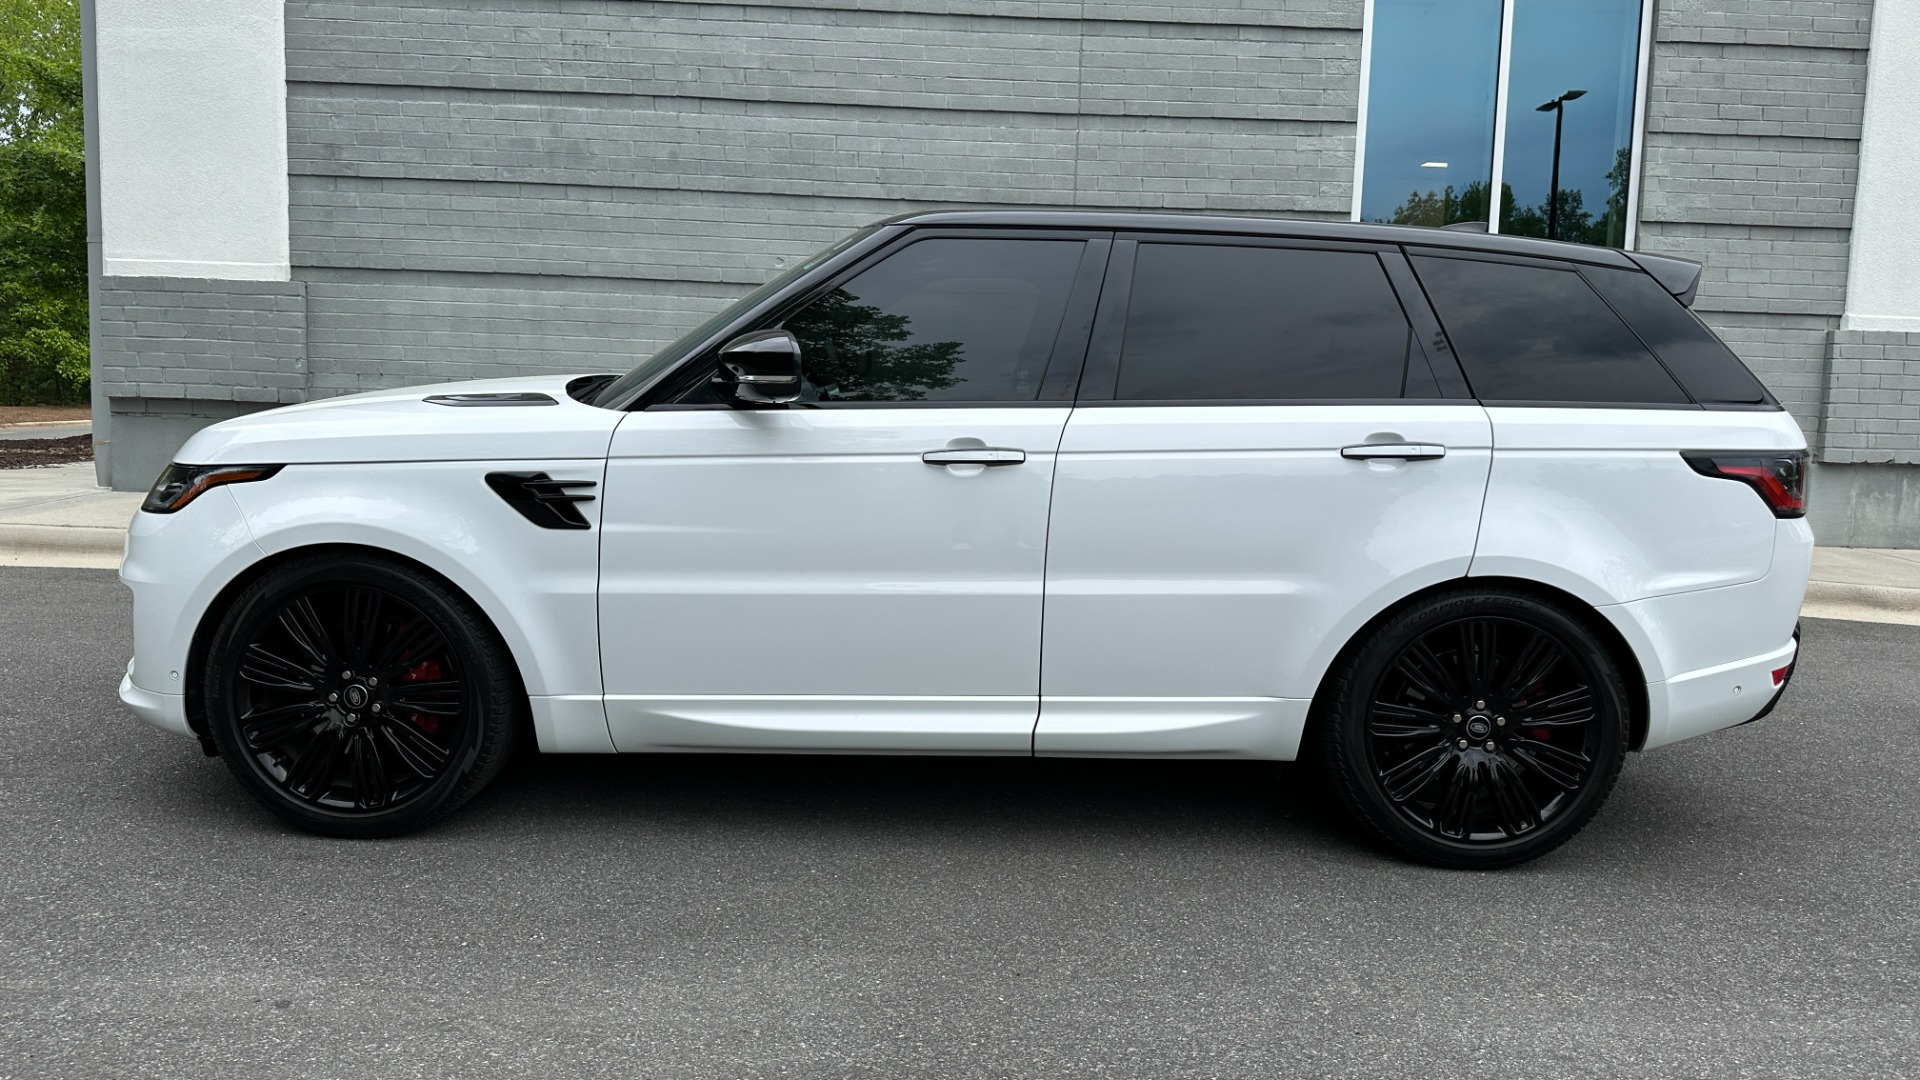 Used 2022 Land Rover Range Rover Sport AUTOBIOGRAPHY / 22 WAY MASSAGE SEATS / DRIVER ASSIST / HEADS UP DISPLAY for sale $99,999 at Formula Imports in Charlotte NC 28227 3